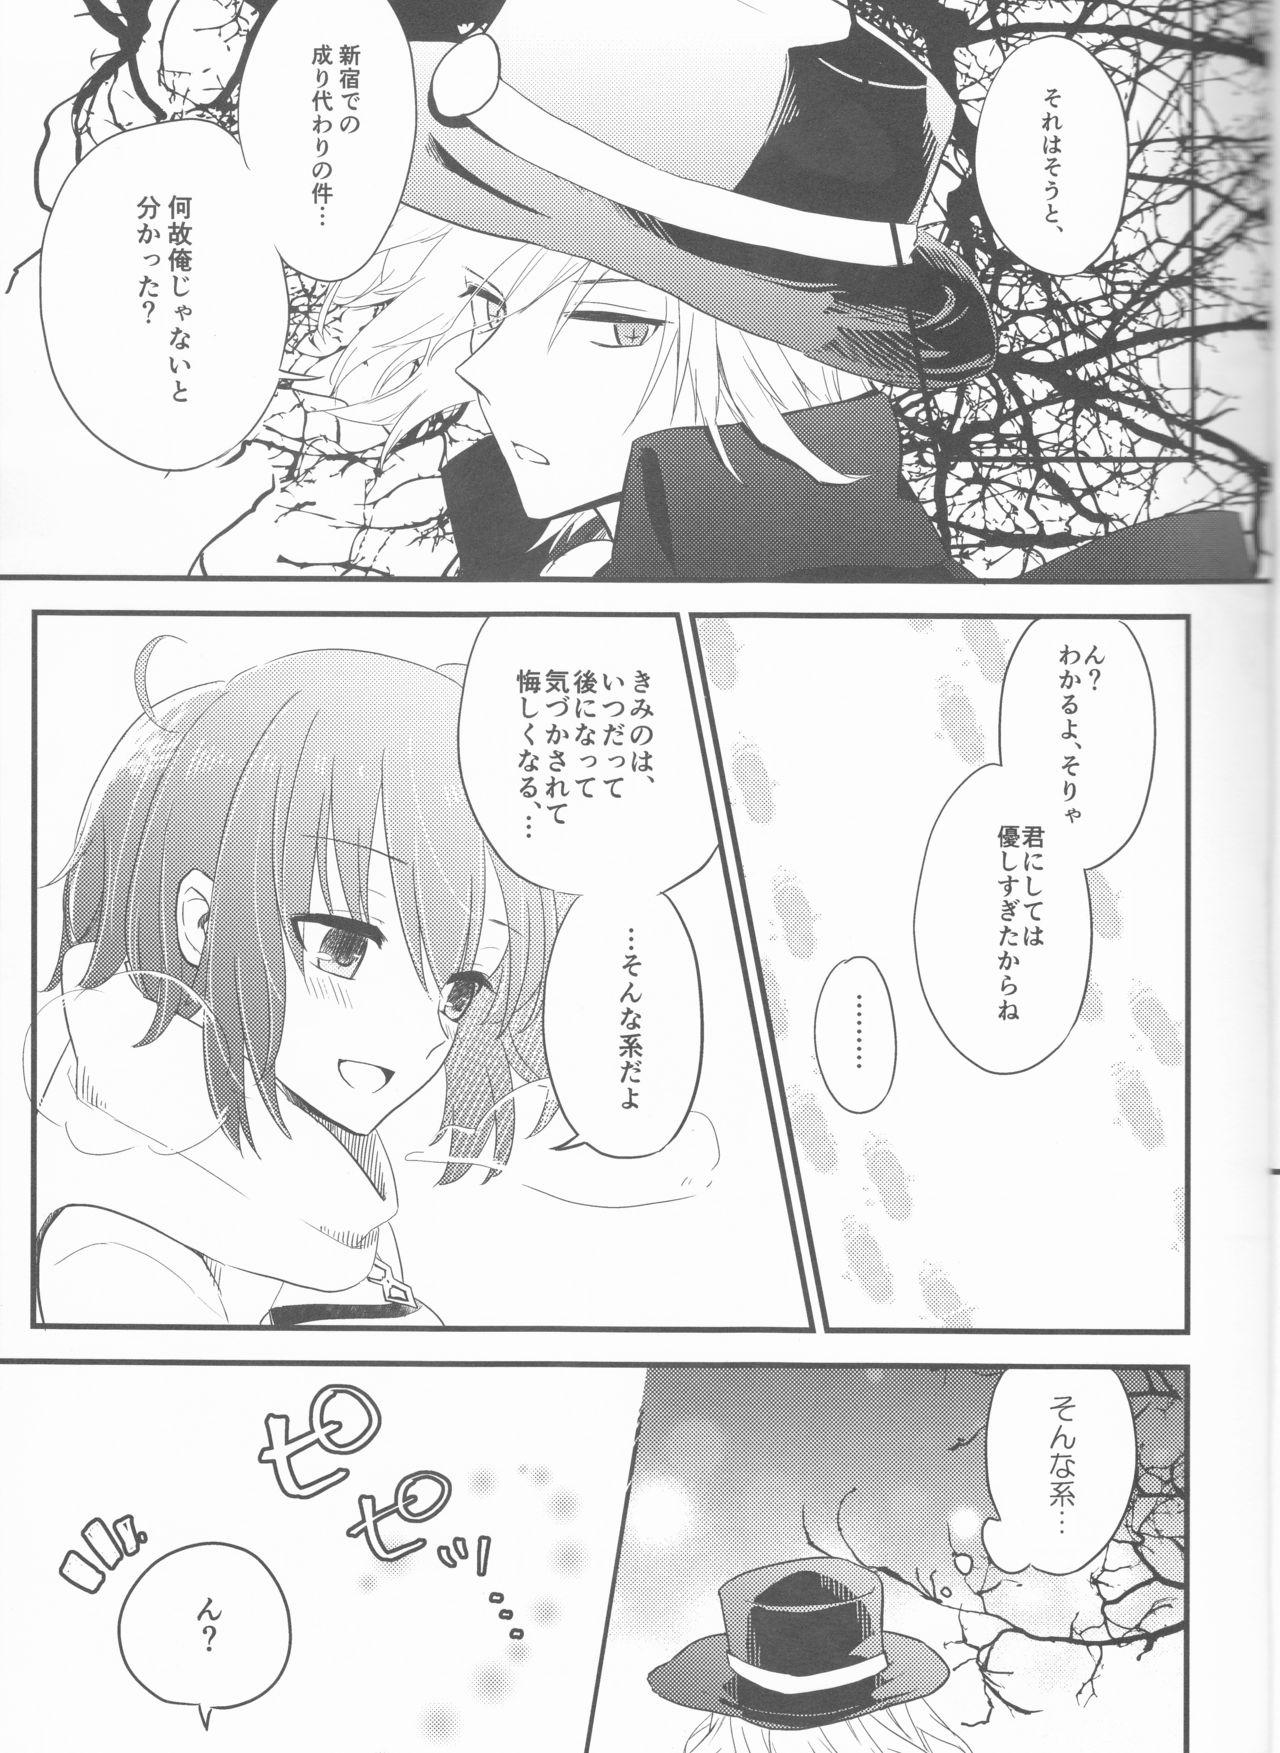 Hentai Yume no Ondo - Warmth of the dream - Fate grand order Swallowing - Page 7